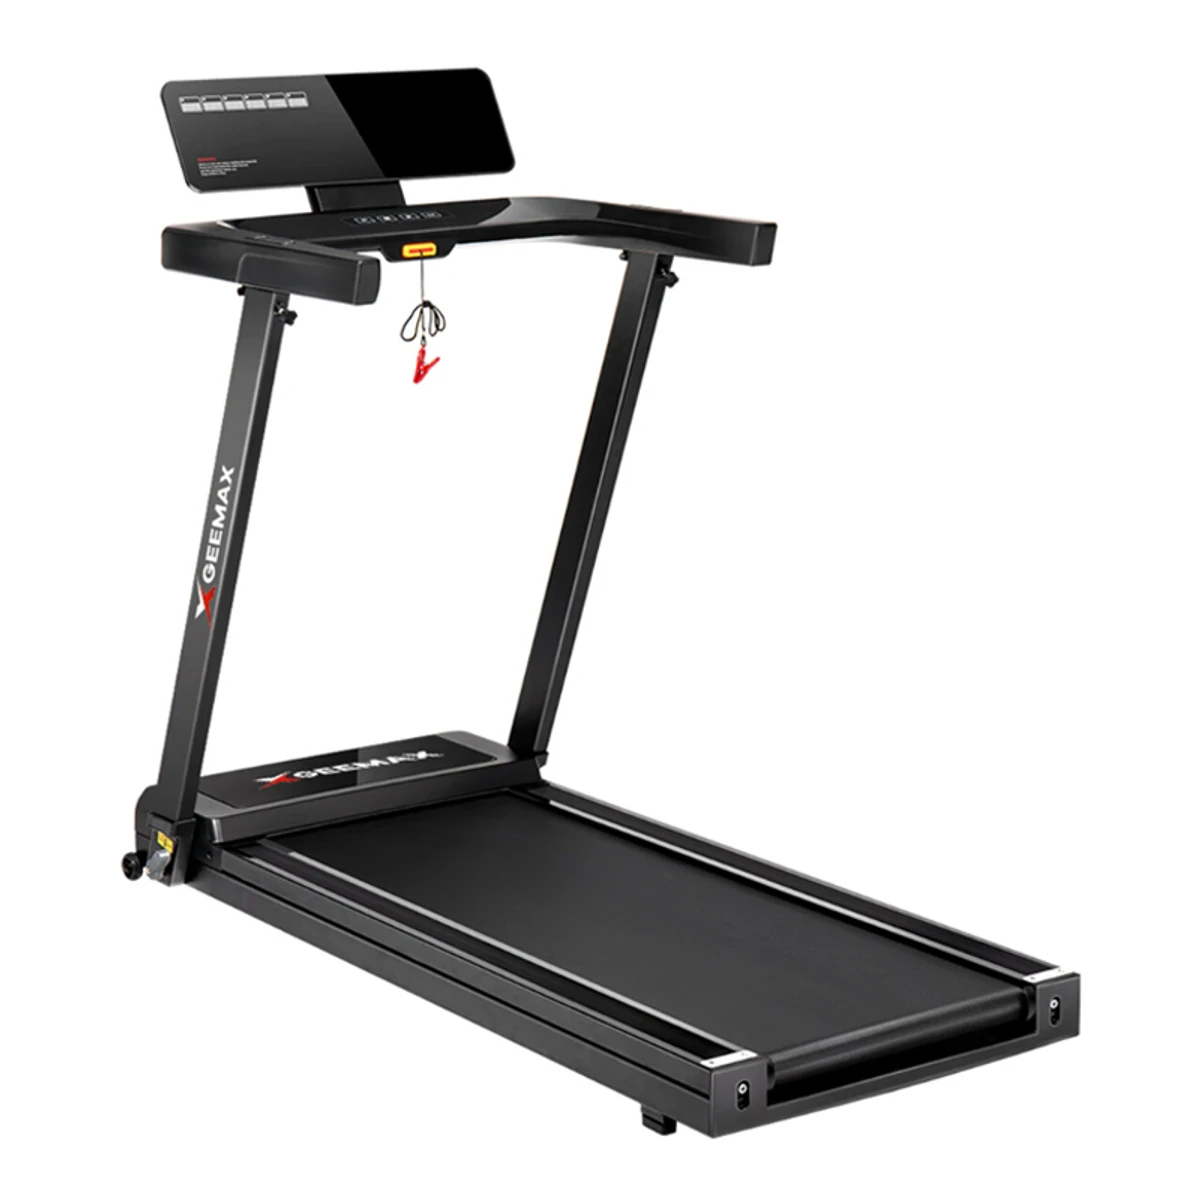 Geemax S1 Professional Folding Treadmill 2.5 HP Power 16KM Max Speed Unlock 130KG Weight Capacity 100% Installation-free with 24-inch LED Smart Display for Home Gym Workouts